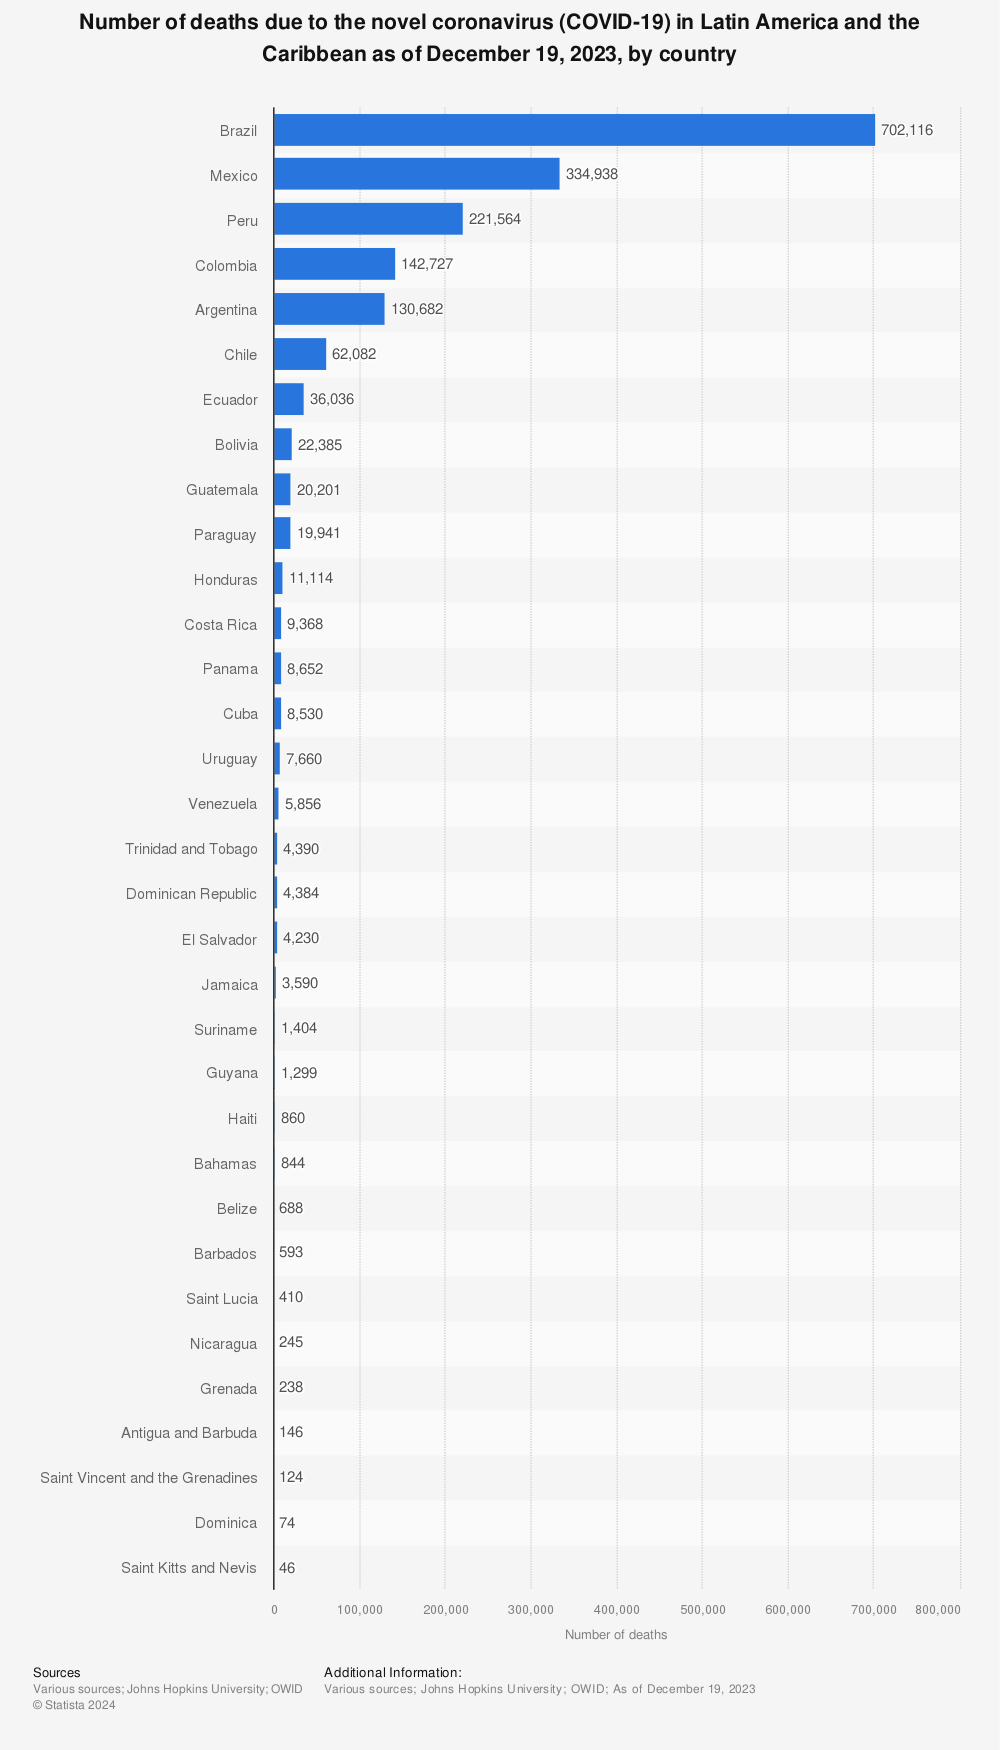 Statistic: Number of deaths due to the novel coronavirus (COVID-19) in Latin America and the Caribbean as of January 20, 2022, by country | Statista